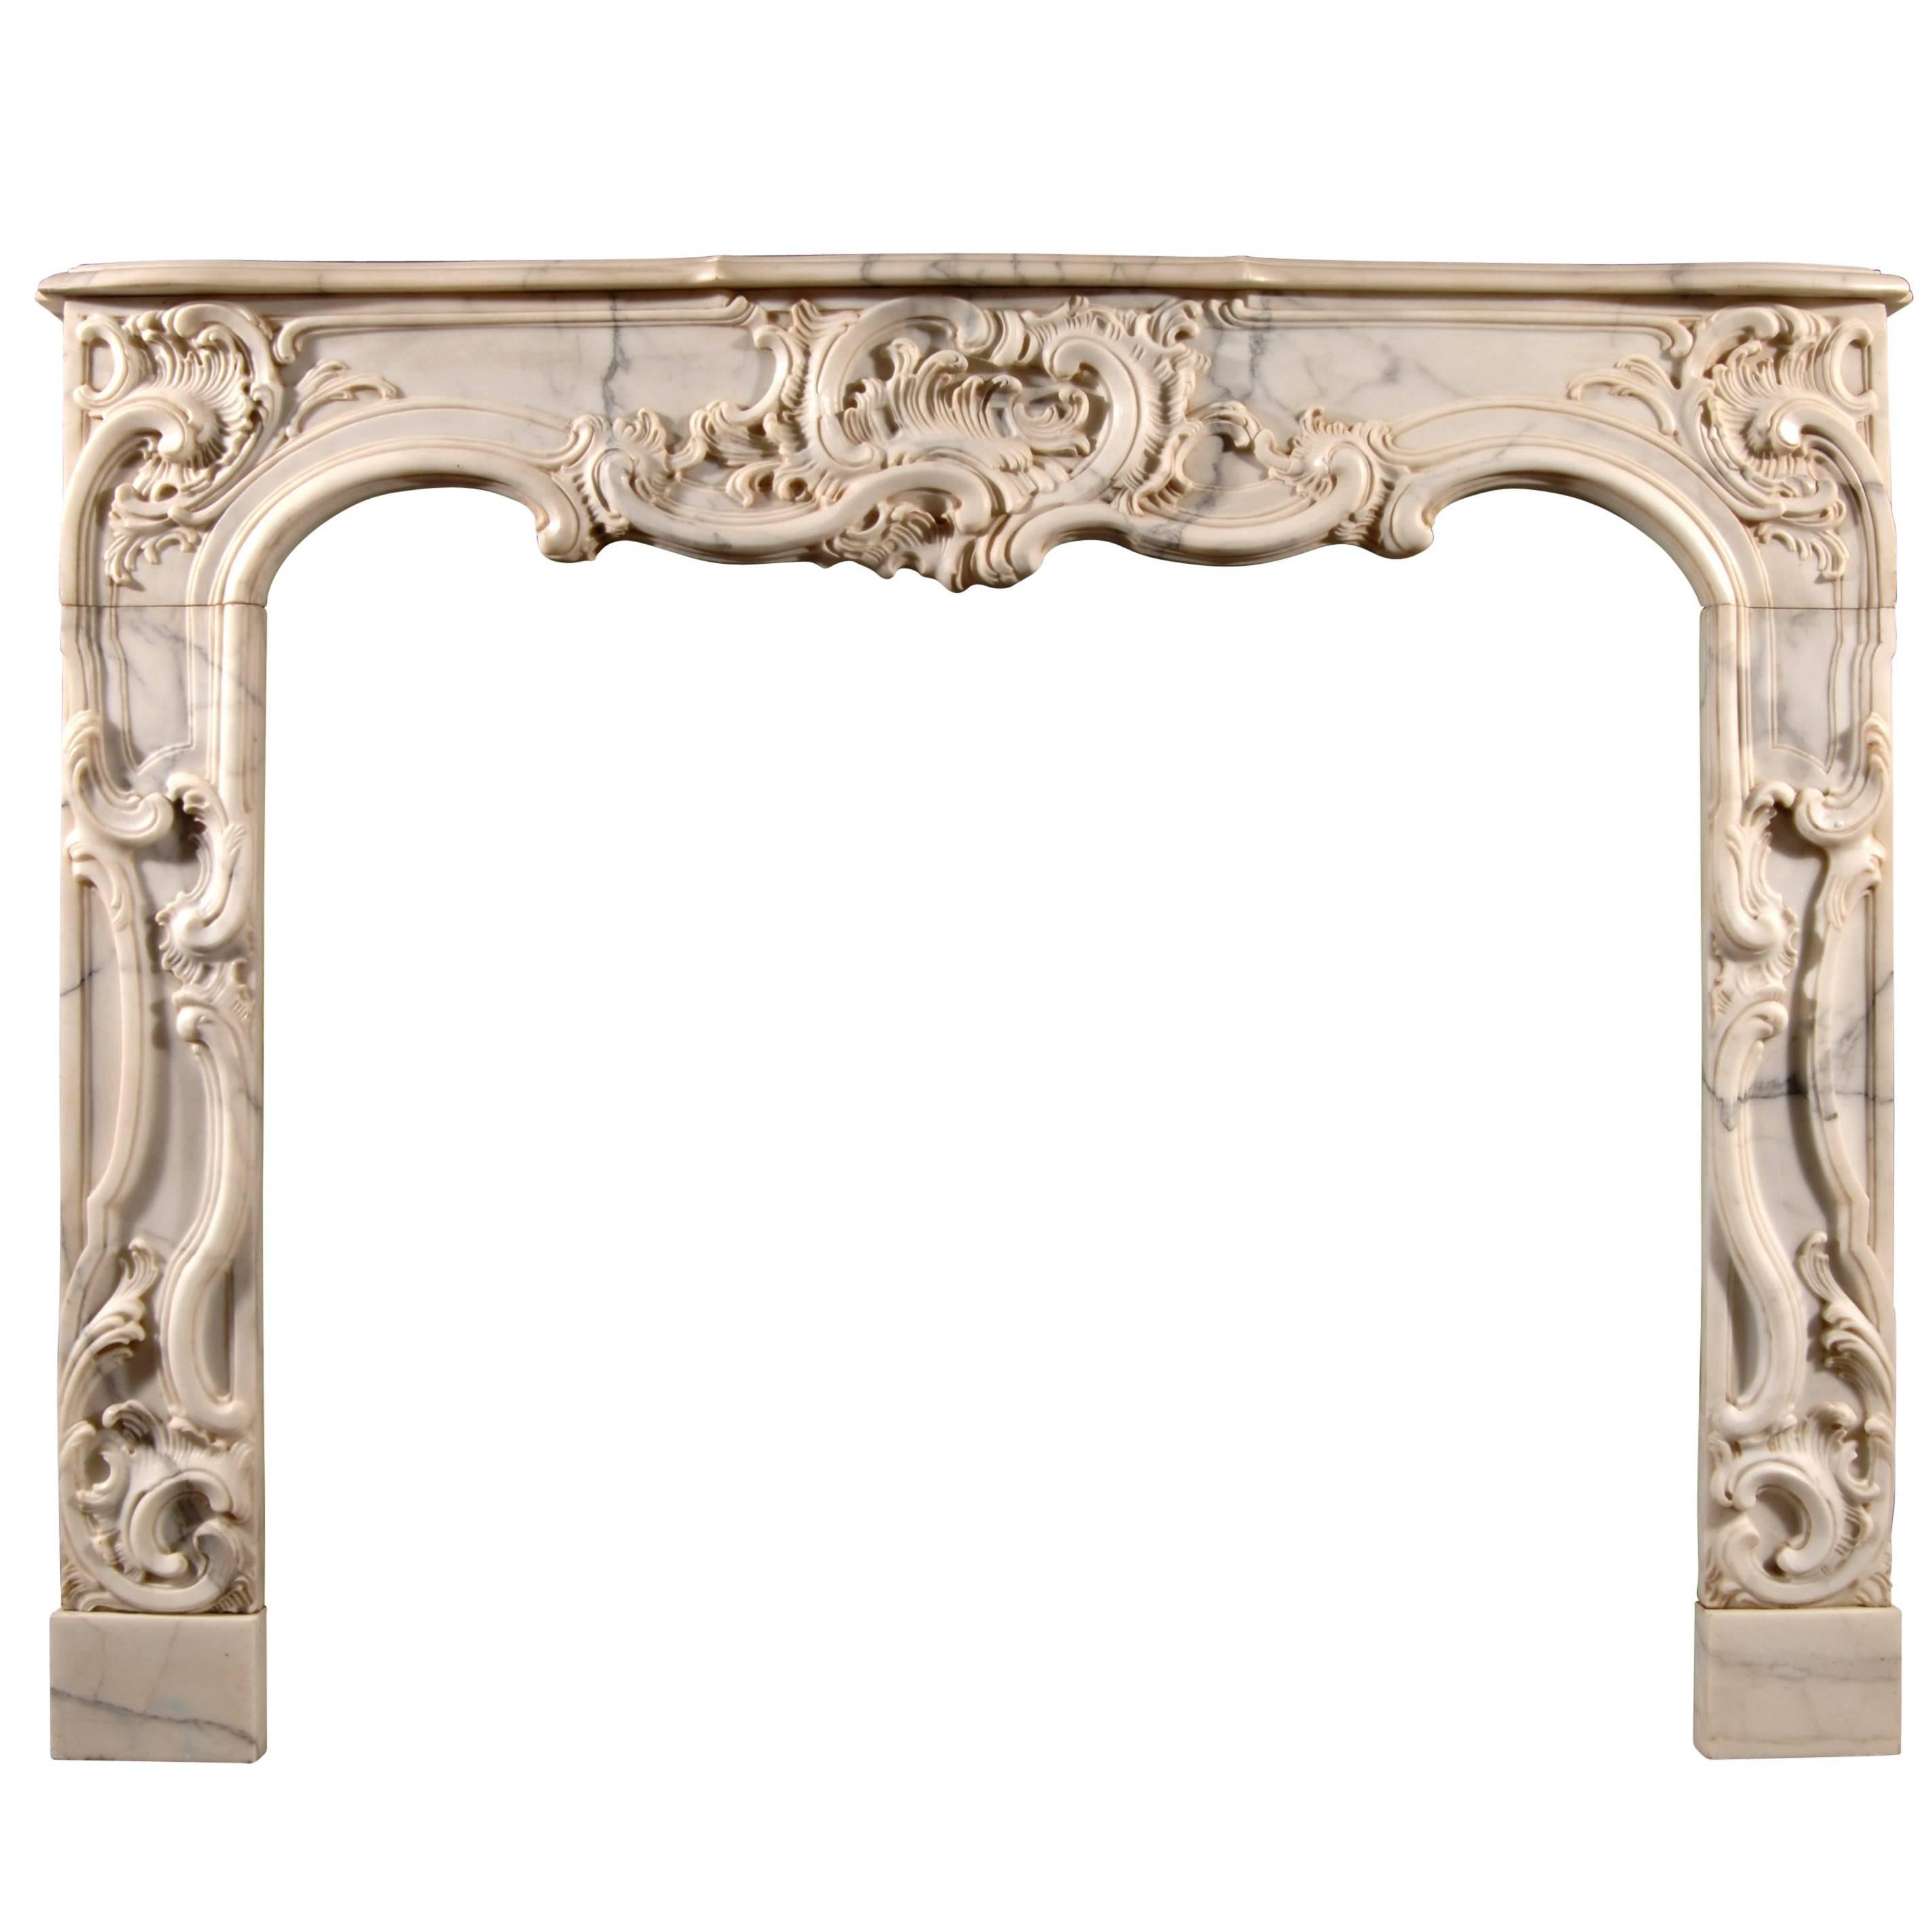 French Provençale Style Arabescato Marble Fireplace For Sale